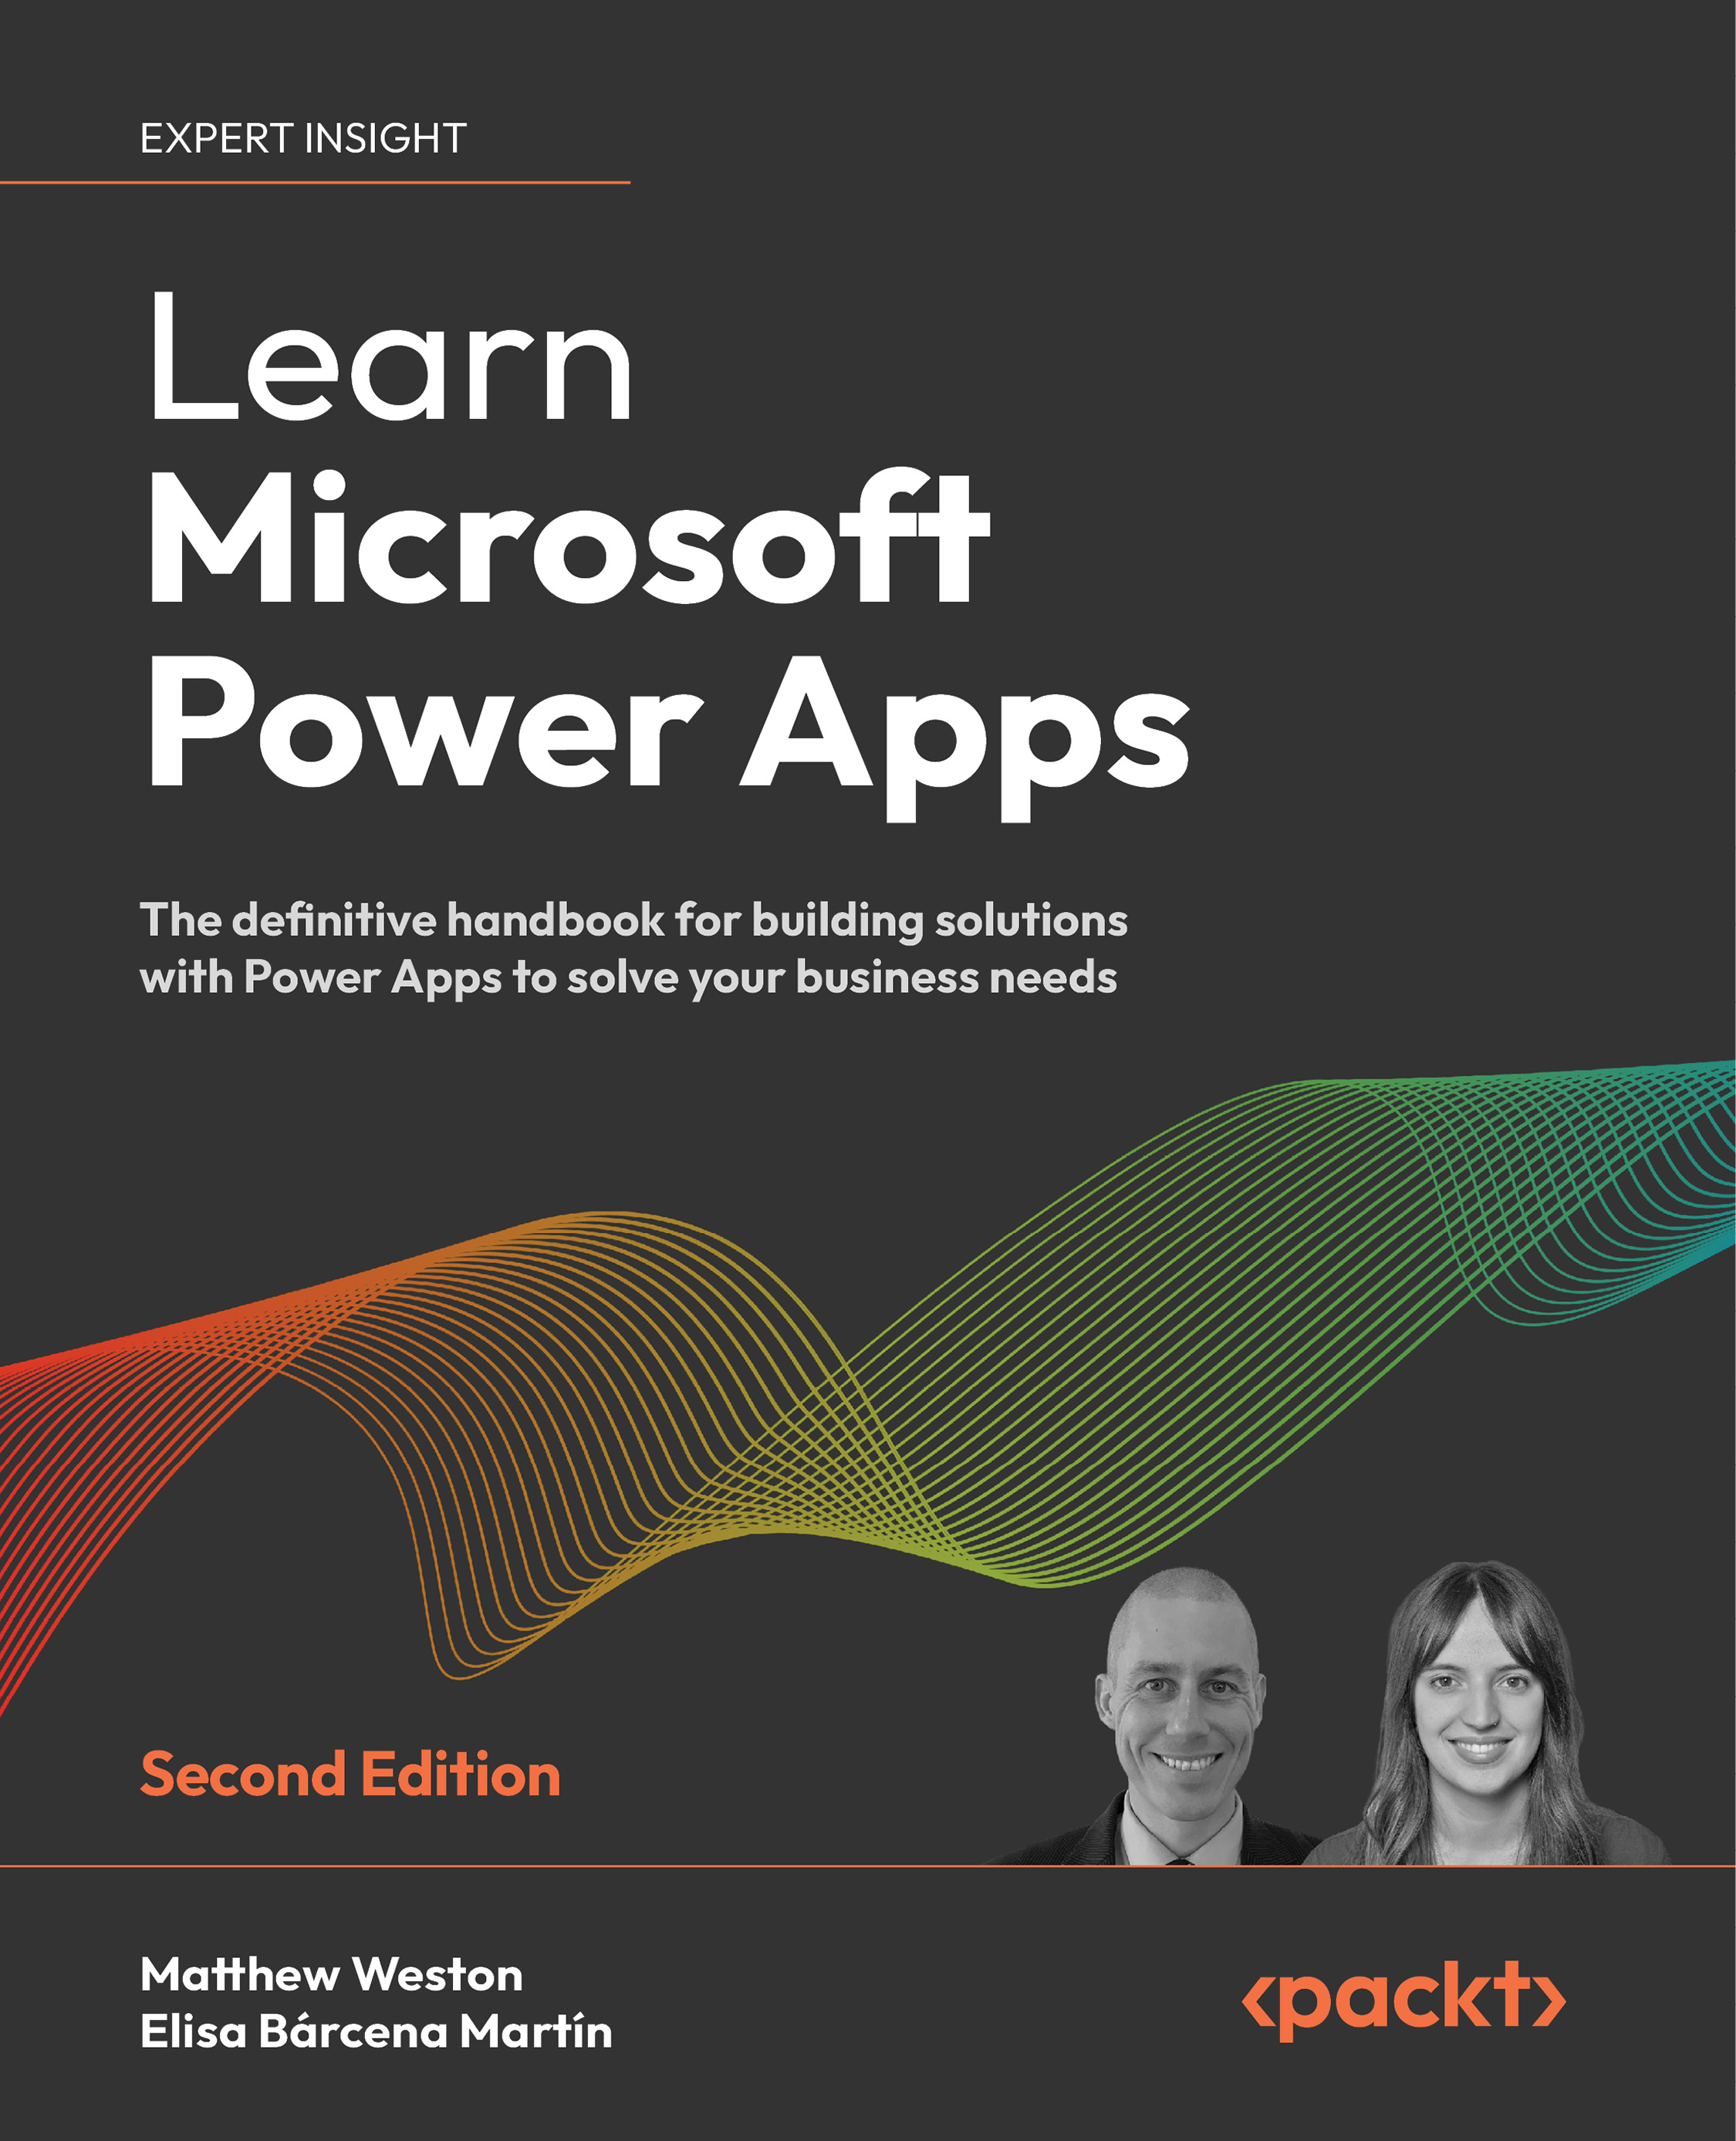 Learn Microsoft Power Apps: The Definitive Handbook for Building Solutions with Power Apps to Solve Your Business Needs [Book]